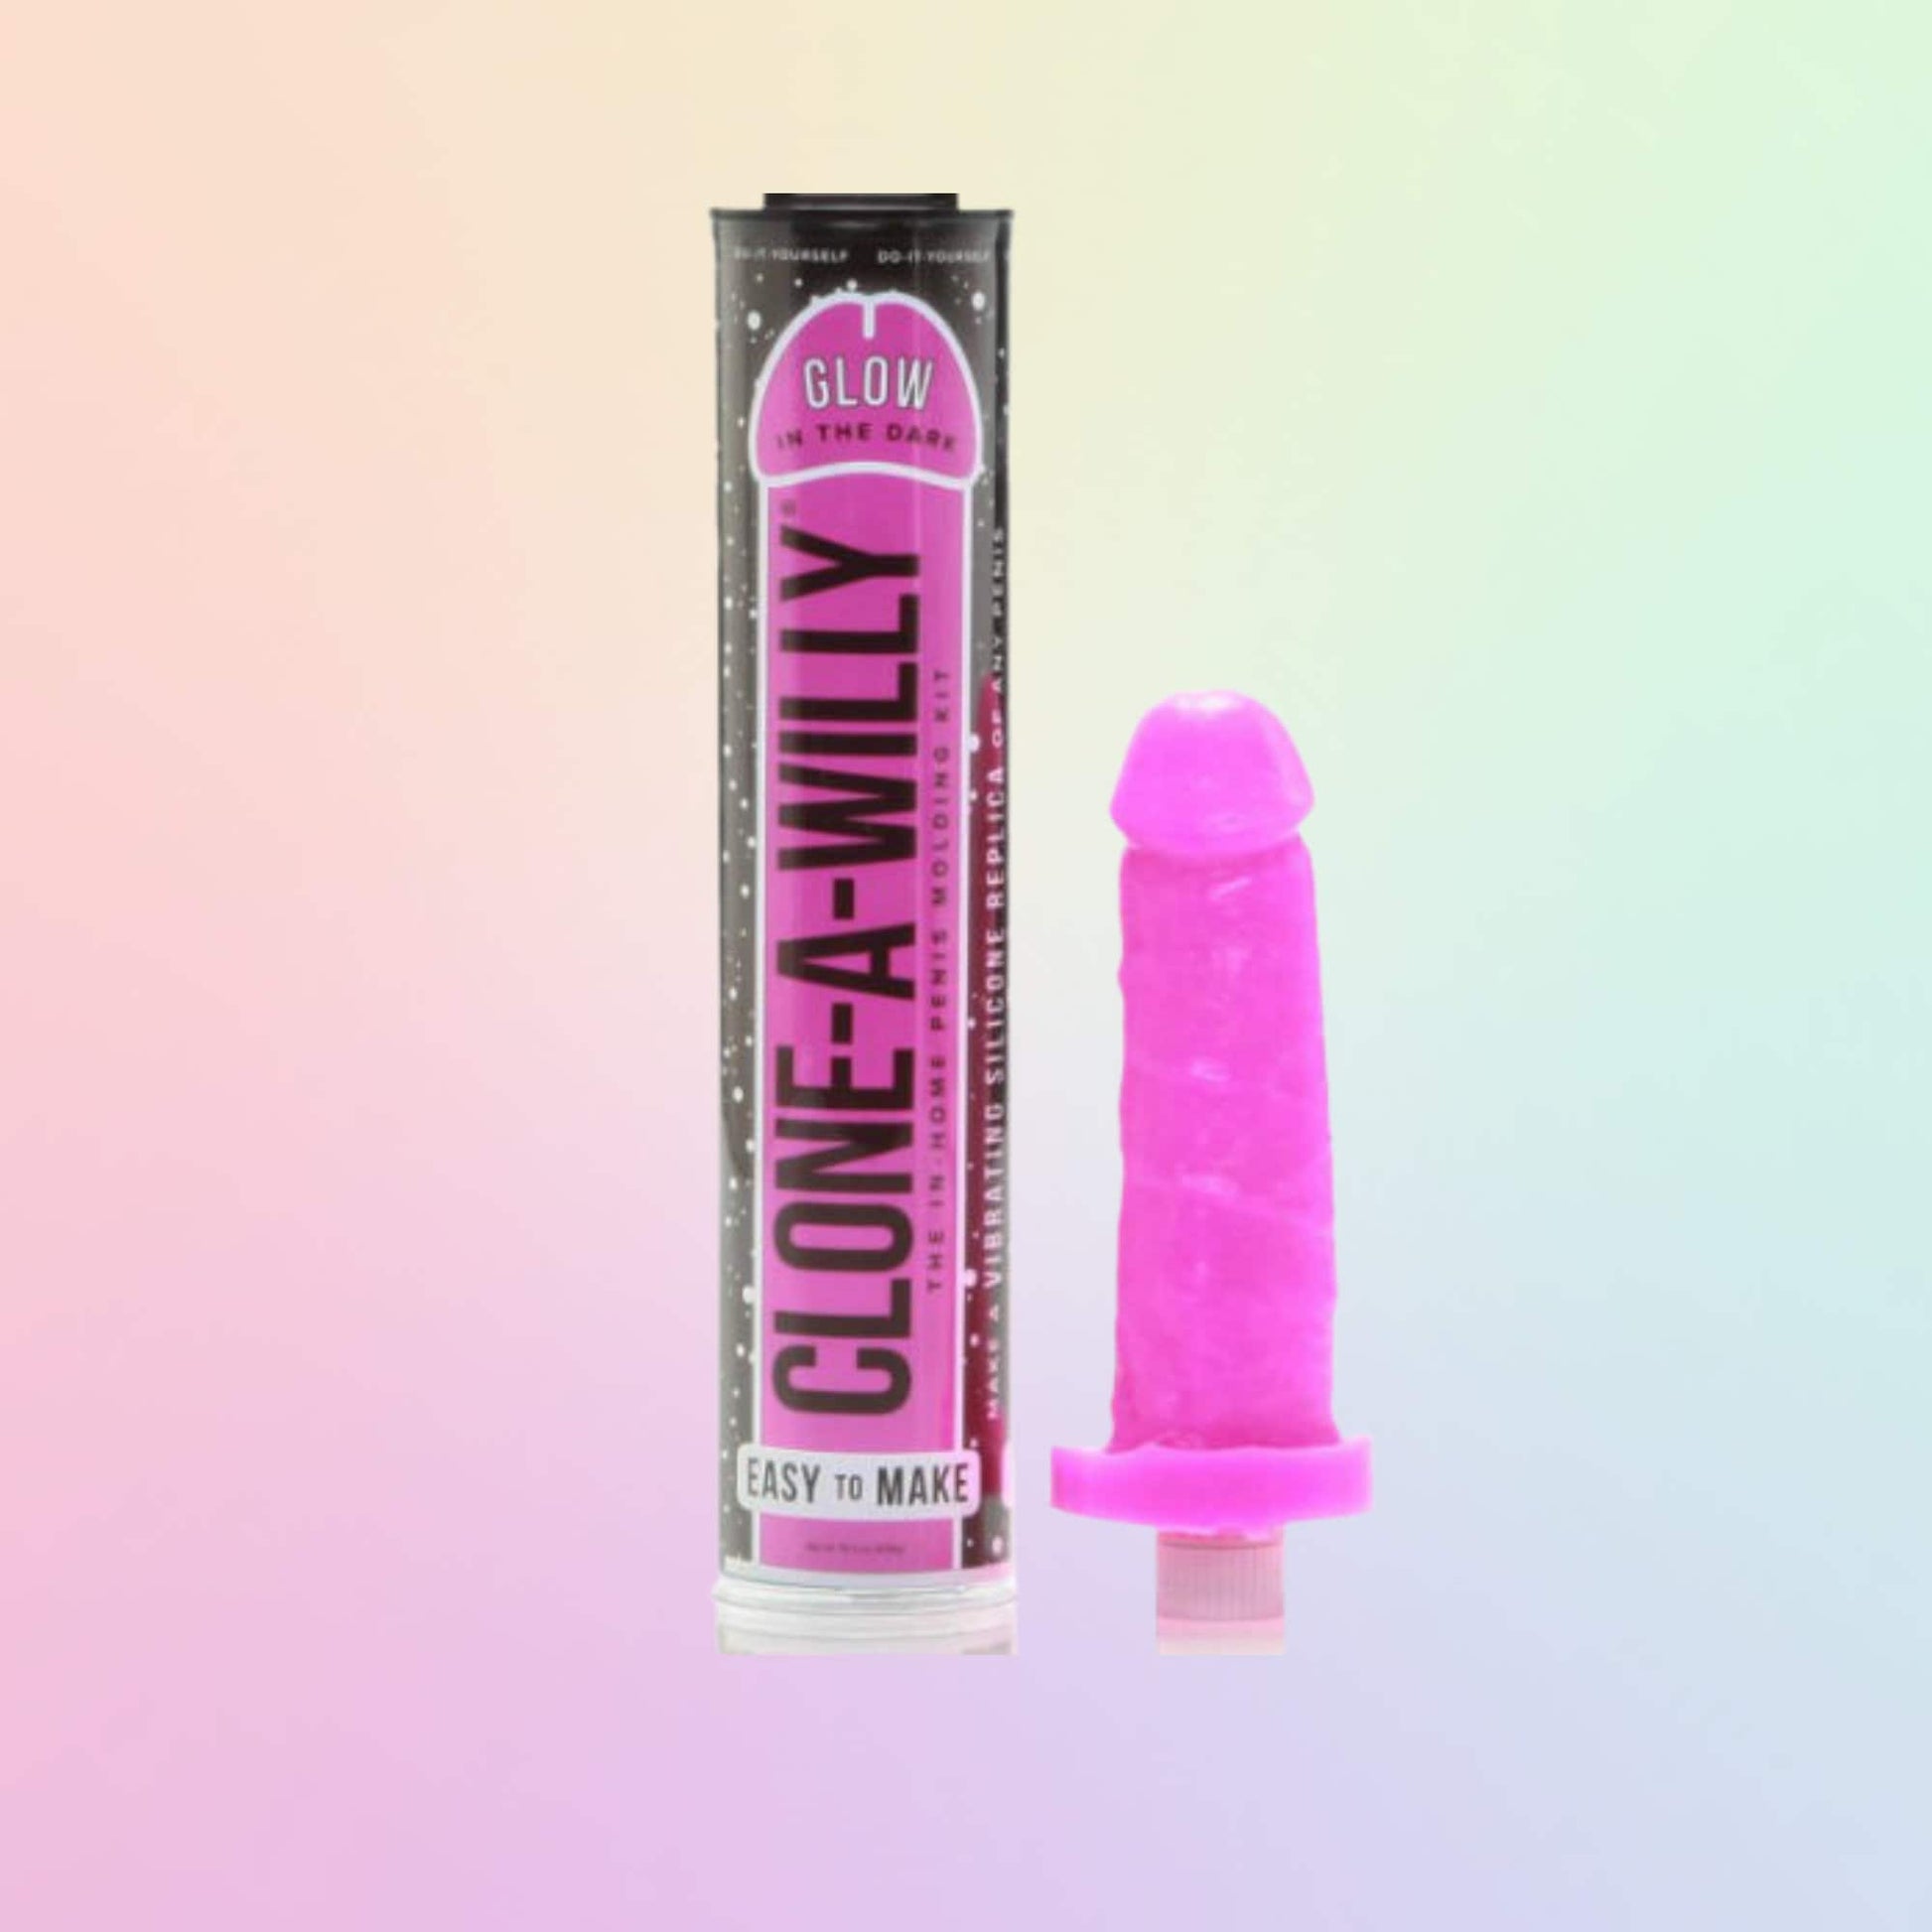 Clone a WILLY DIY Penis Abdruck-Set - OH MY! FANTASY